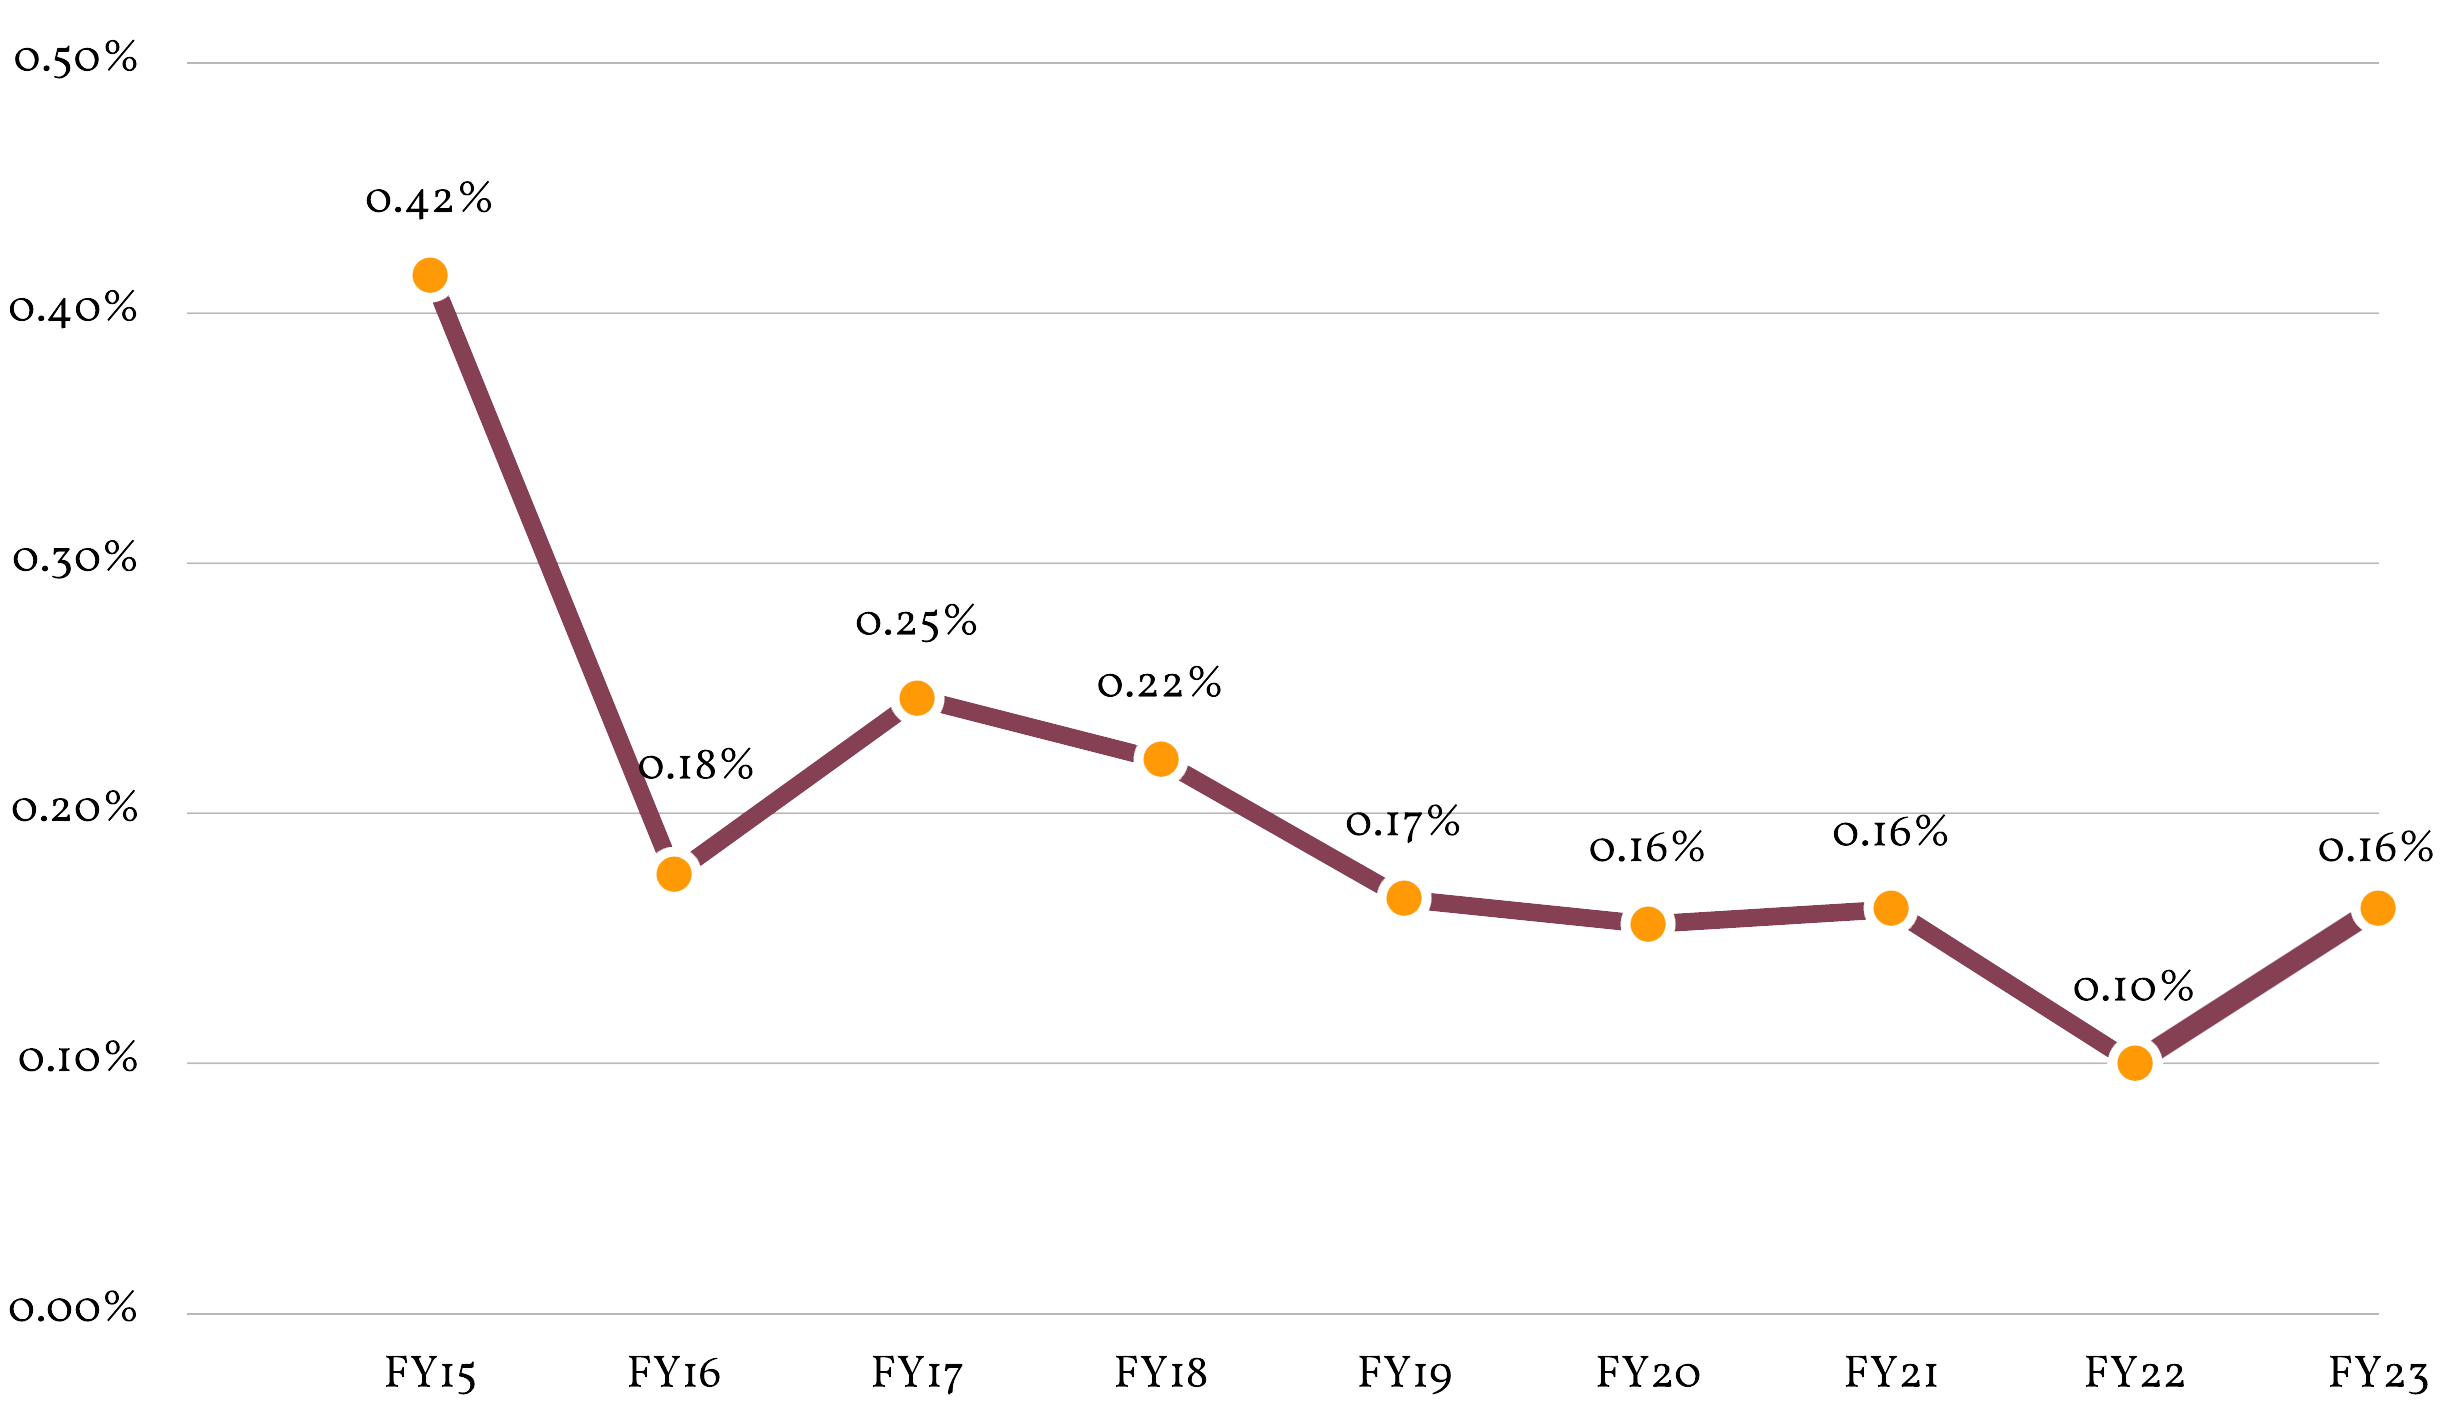 AB Mauri's LTI rate chart, from fiscal year 2015 to fiscal year 2022, demonstrating an overall drop of over 75% over the 7 years shown.